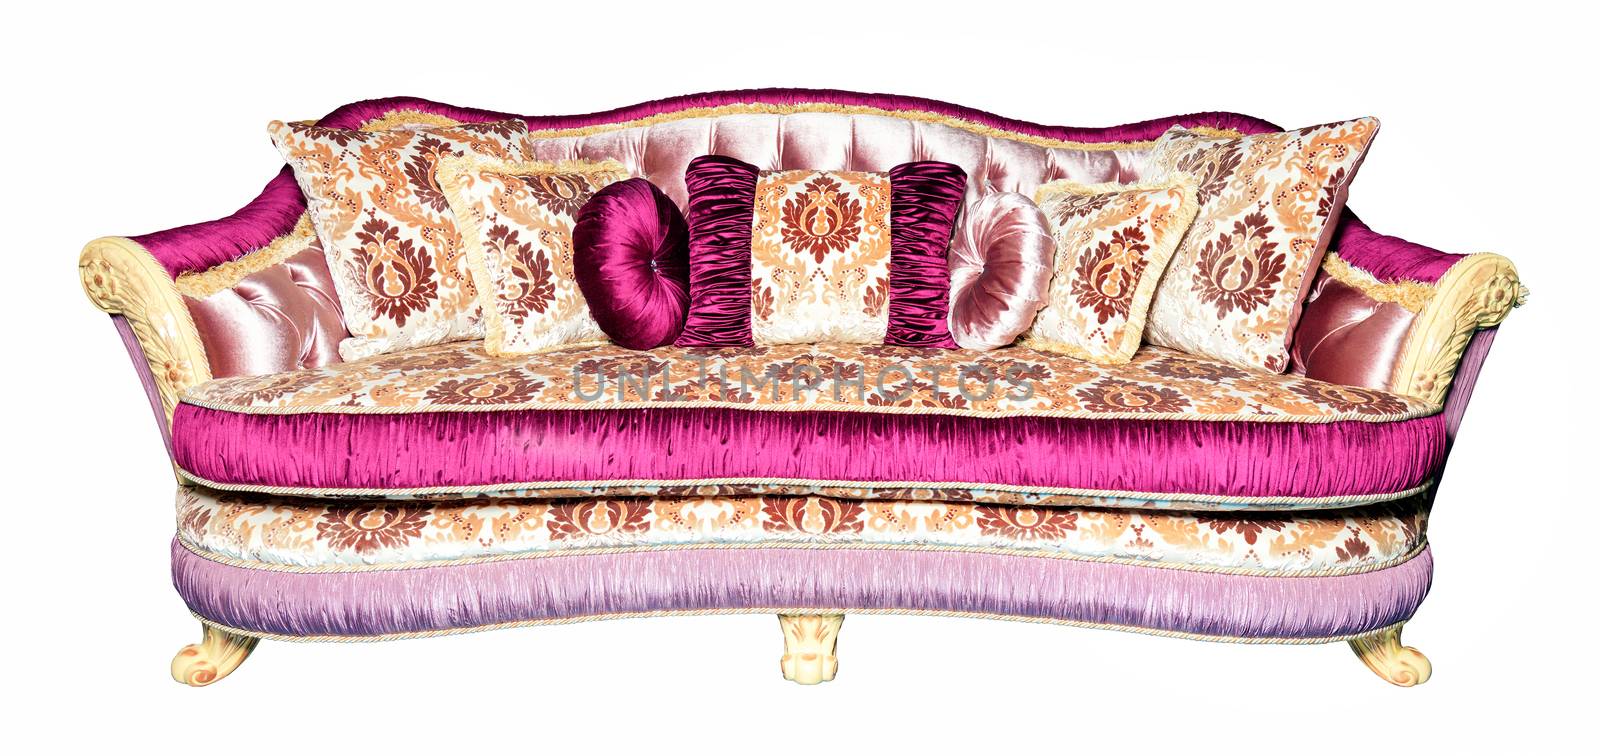 Soft beautiful sofa, upholstered in expensive brocade textile upholstery in pink shades, with many soft pillows, with curved carved legs, photographed in front, isolated on a white background.